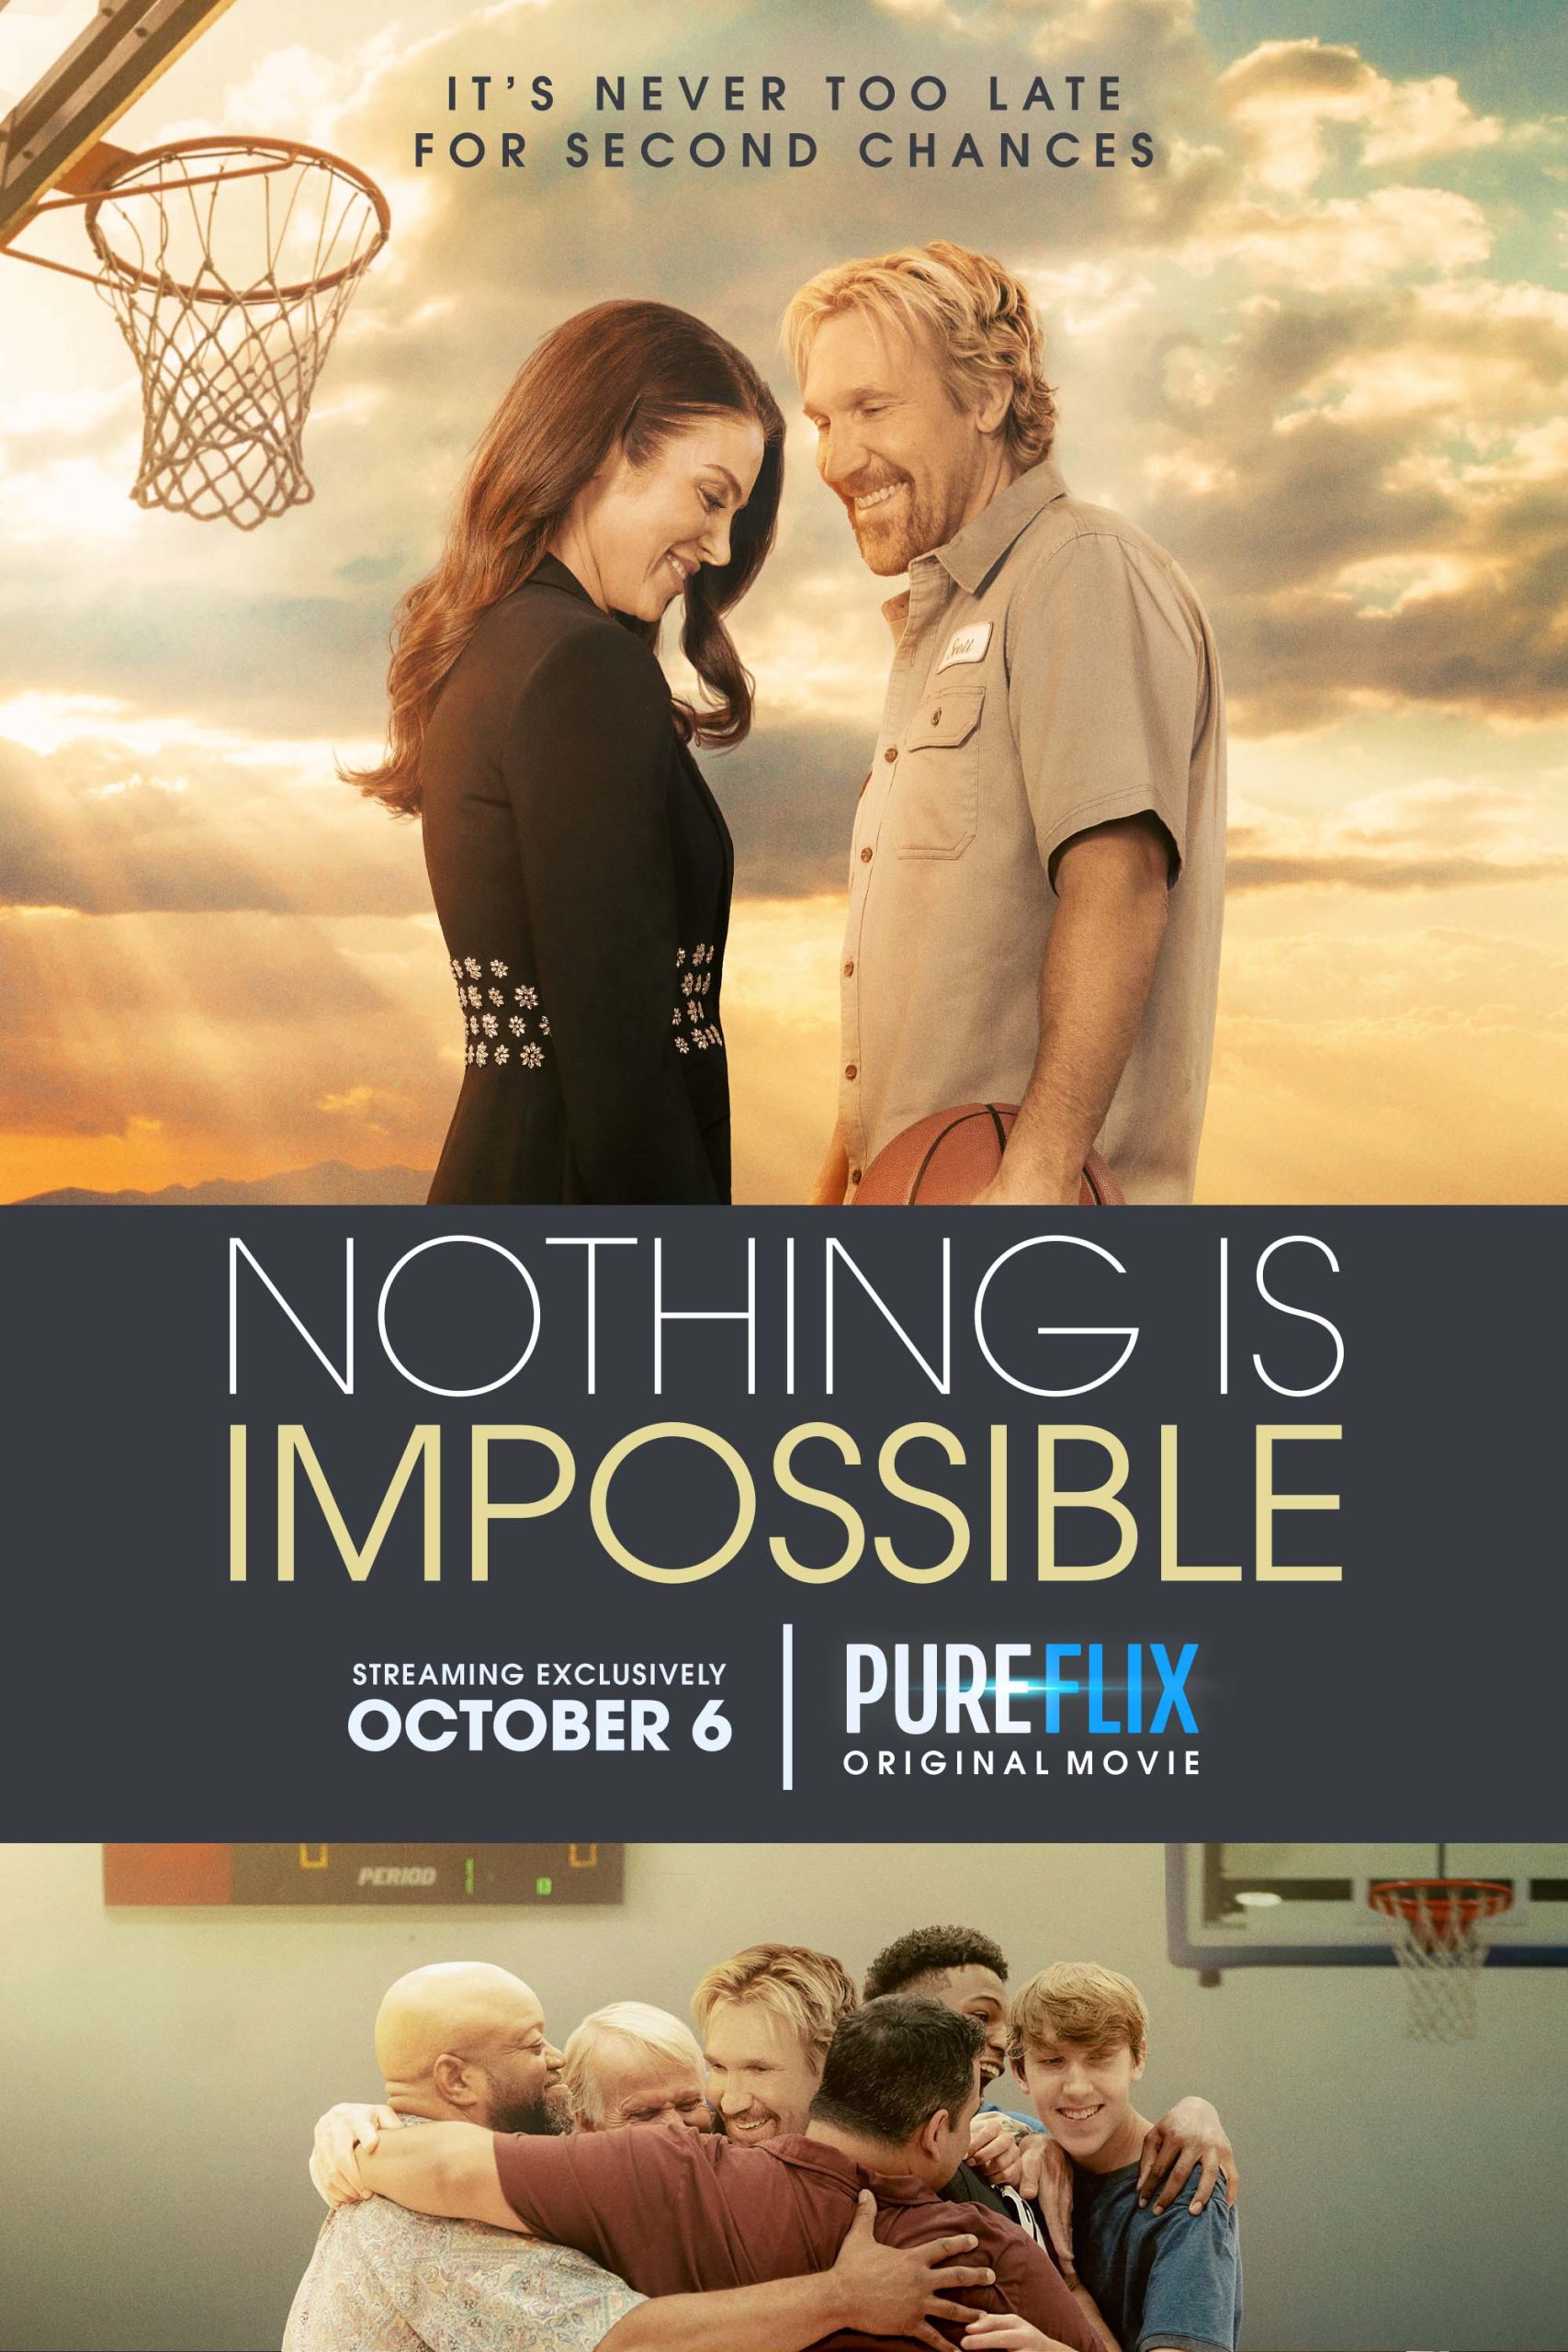 Nothing is impossible on Pureflix starting 6th October 2022